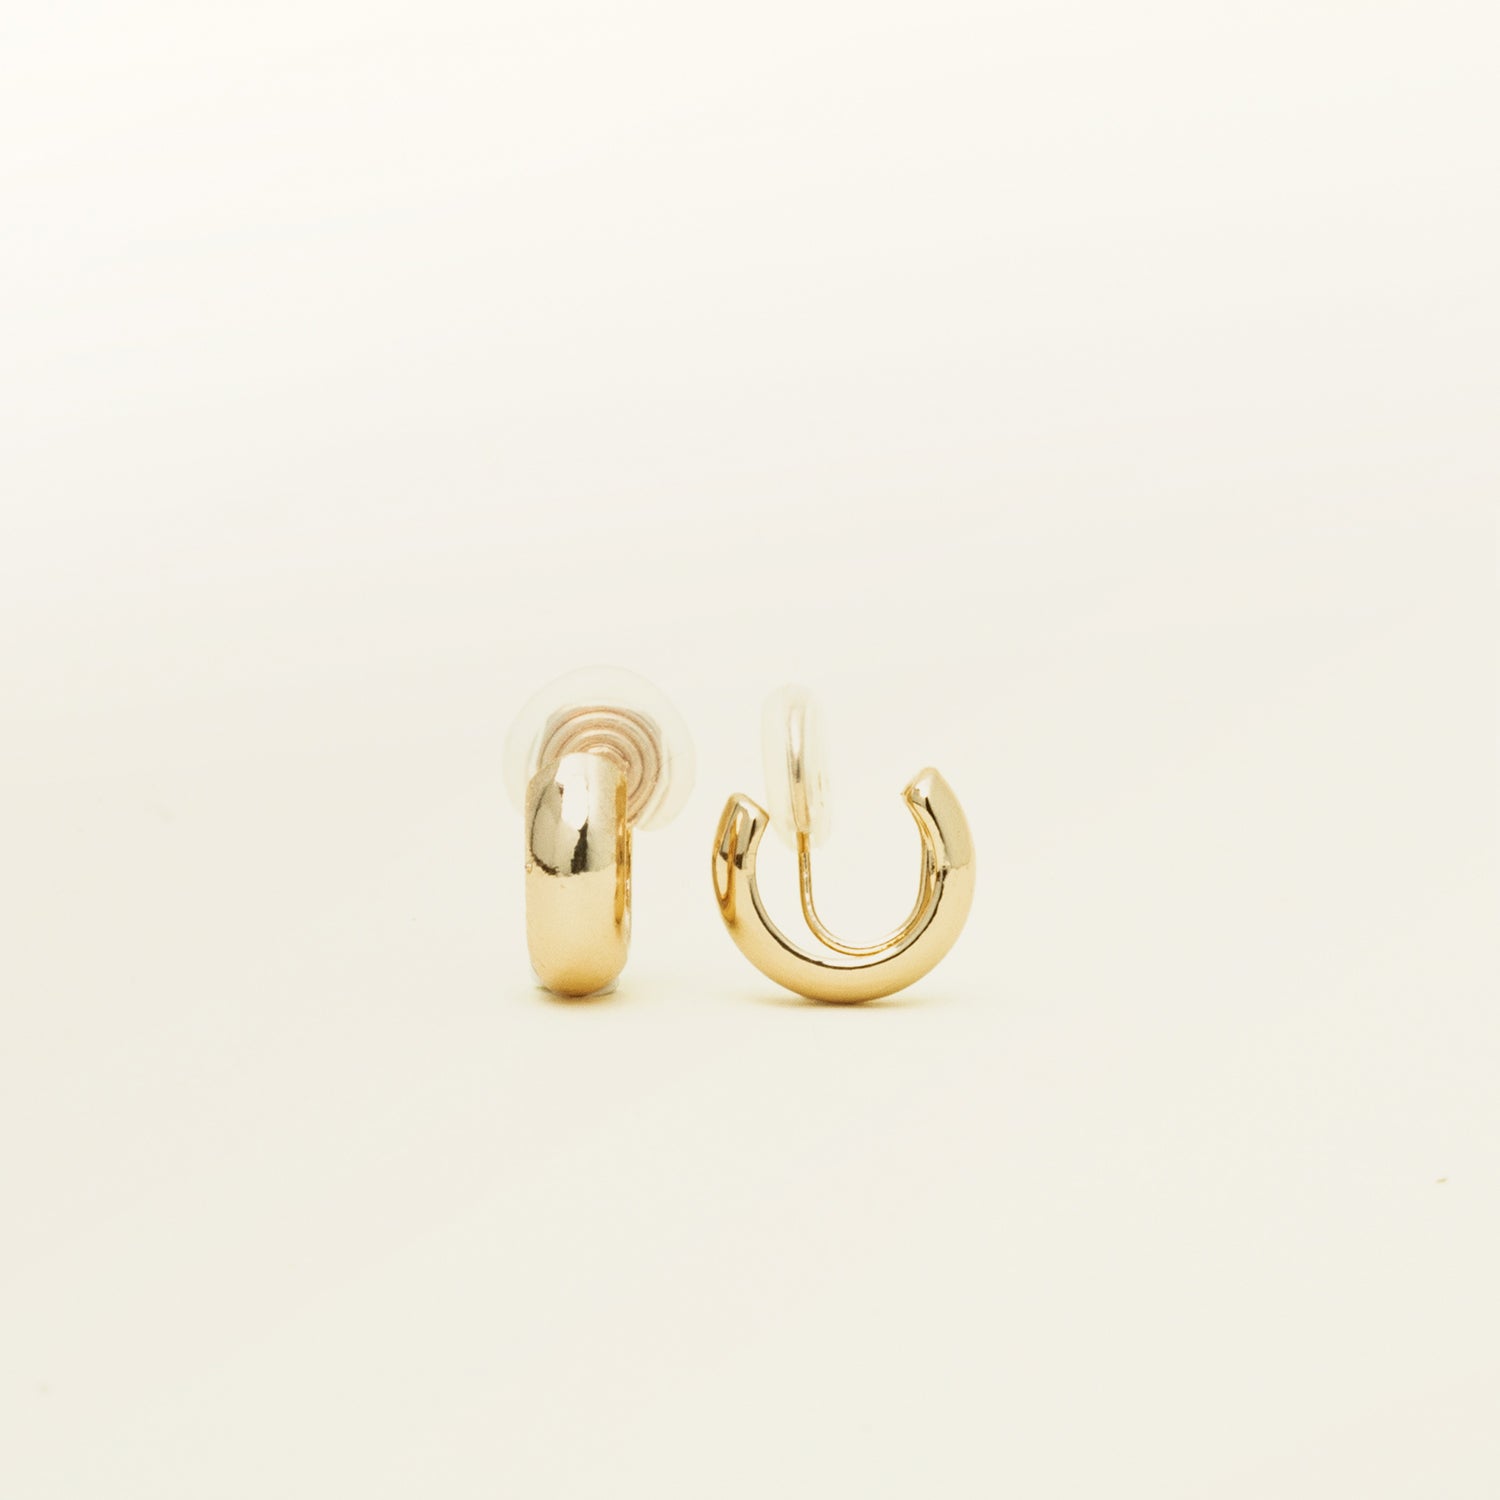  Image of the Simple Gold Huggie Clip-On Earrings feature a mosquito coil closure ideal for all ear types, providing a medium-secure hold and comfortable wear for up to 24 hours. These earrings can be adjusted with a gentle squeeze of the padding forward once on the ear. Crafted with Gold tone plated copper alloy, these sophisticated earrings are also available in Silver.